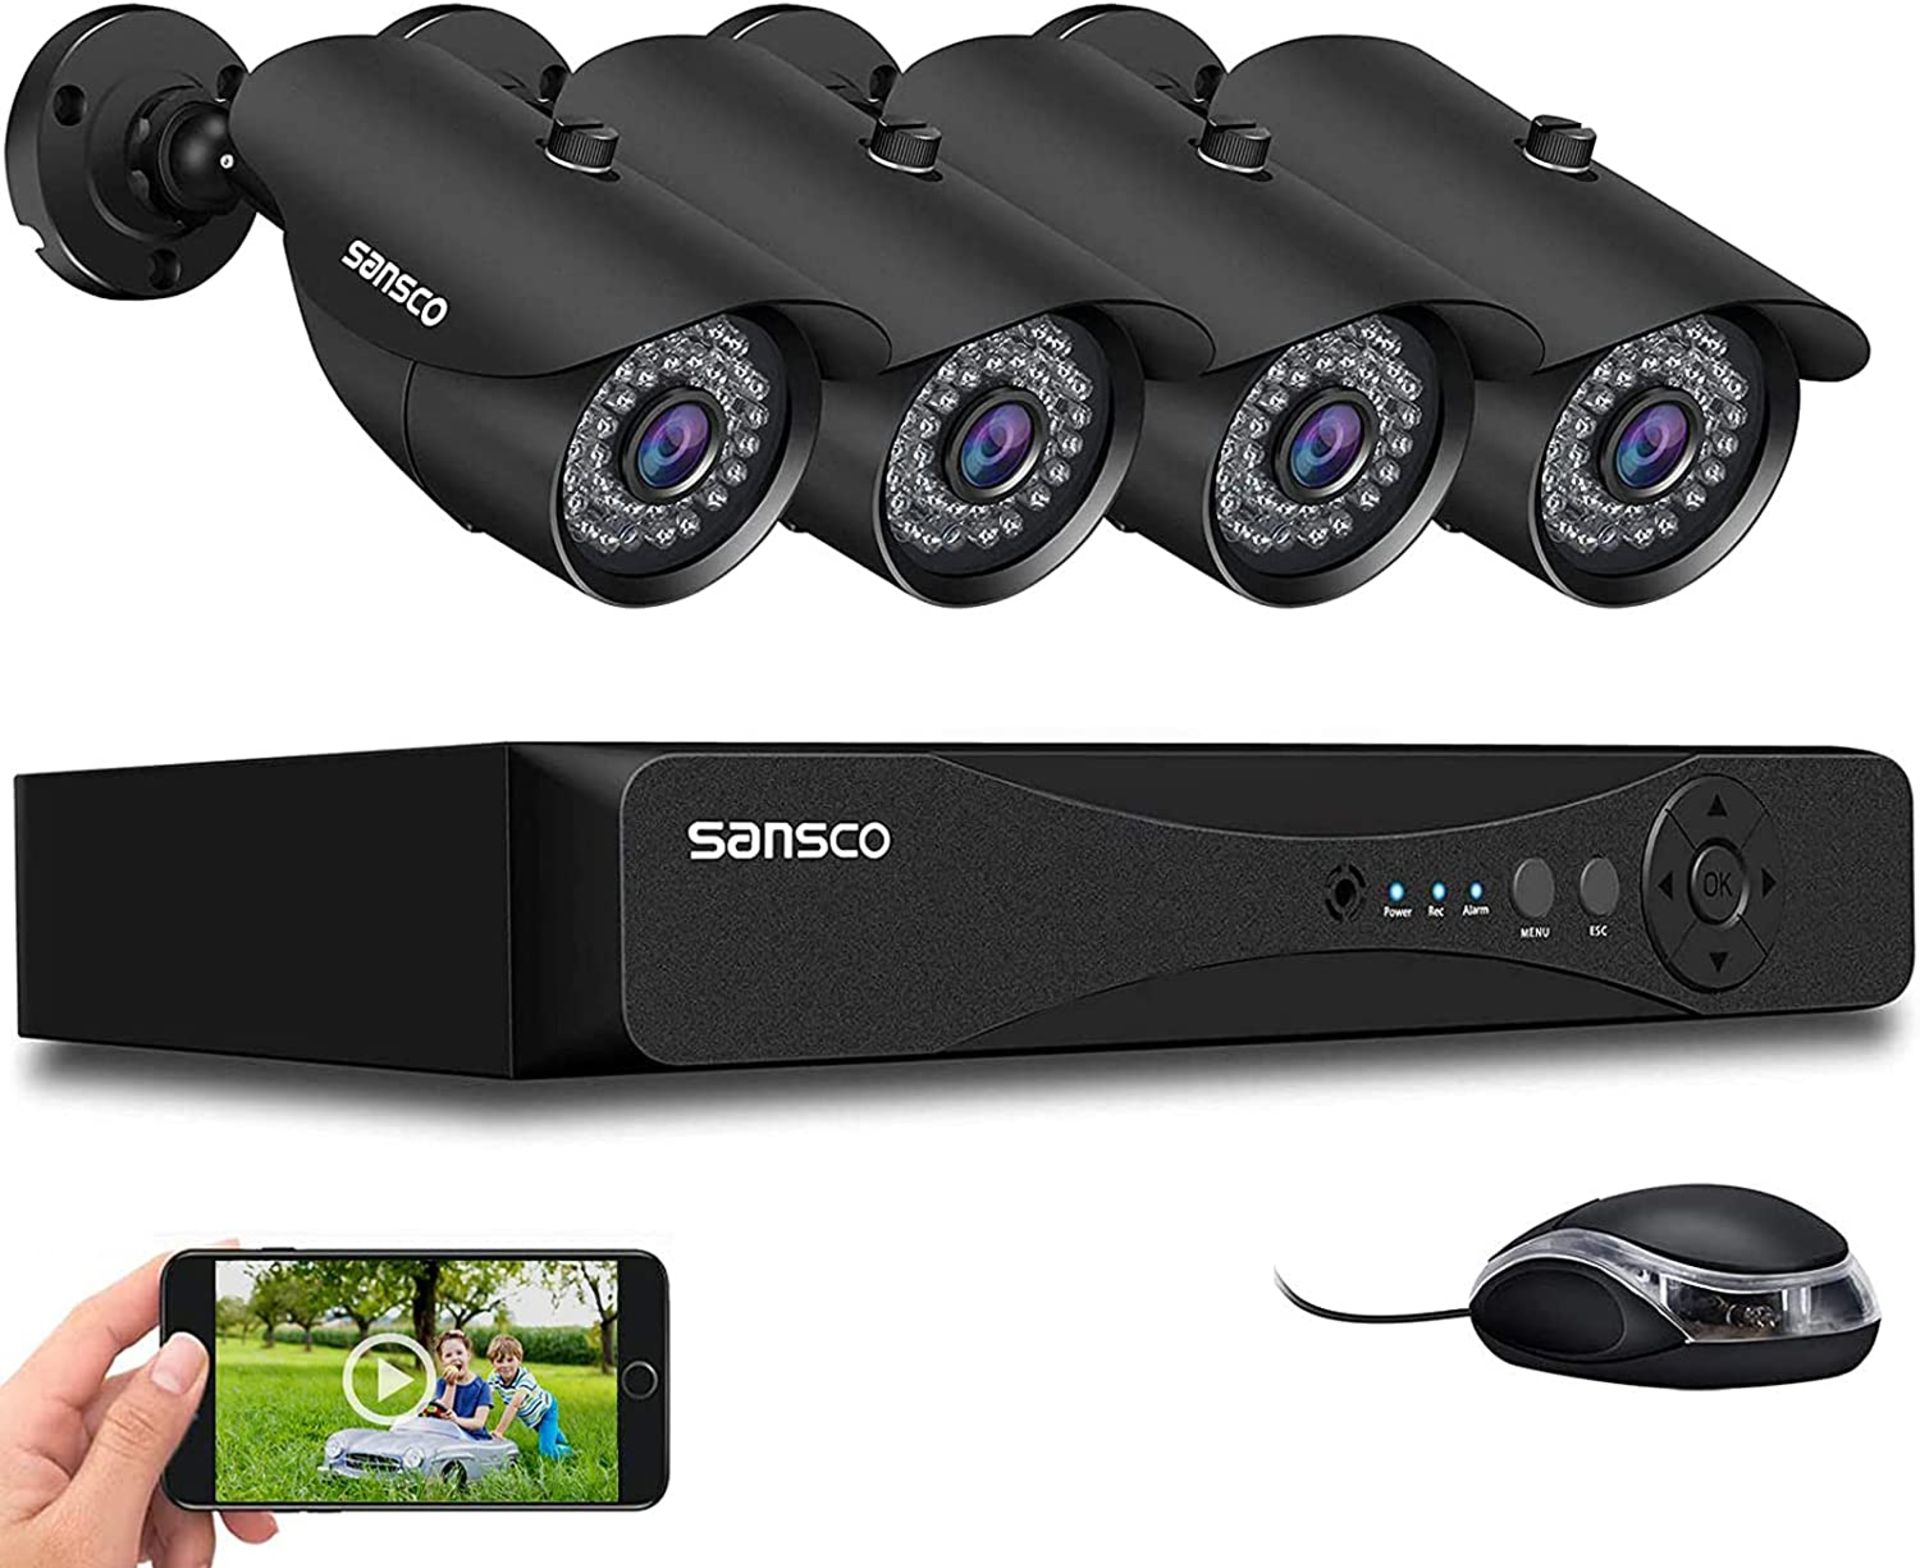 RRP £159.99 [TRUE 1080p HD] SANSCO 8 Channel DVR CCTV Security Camera System with (4) 2MP Super HD